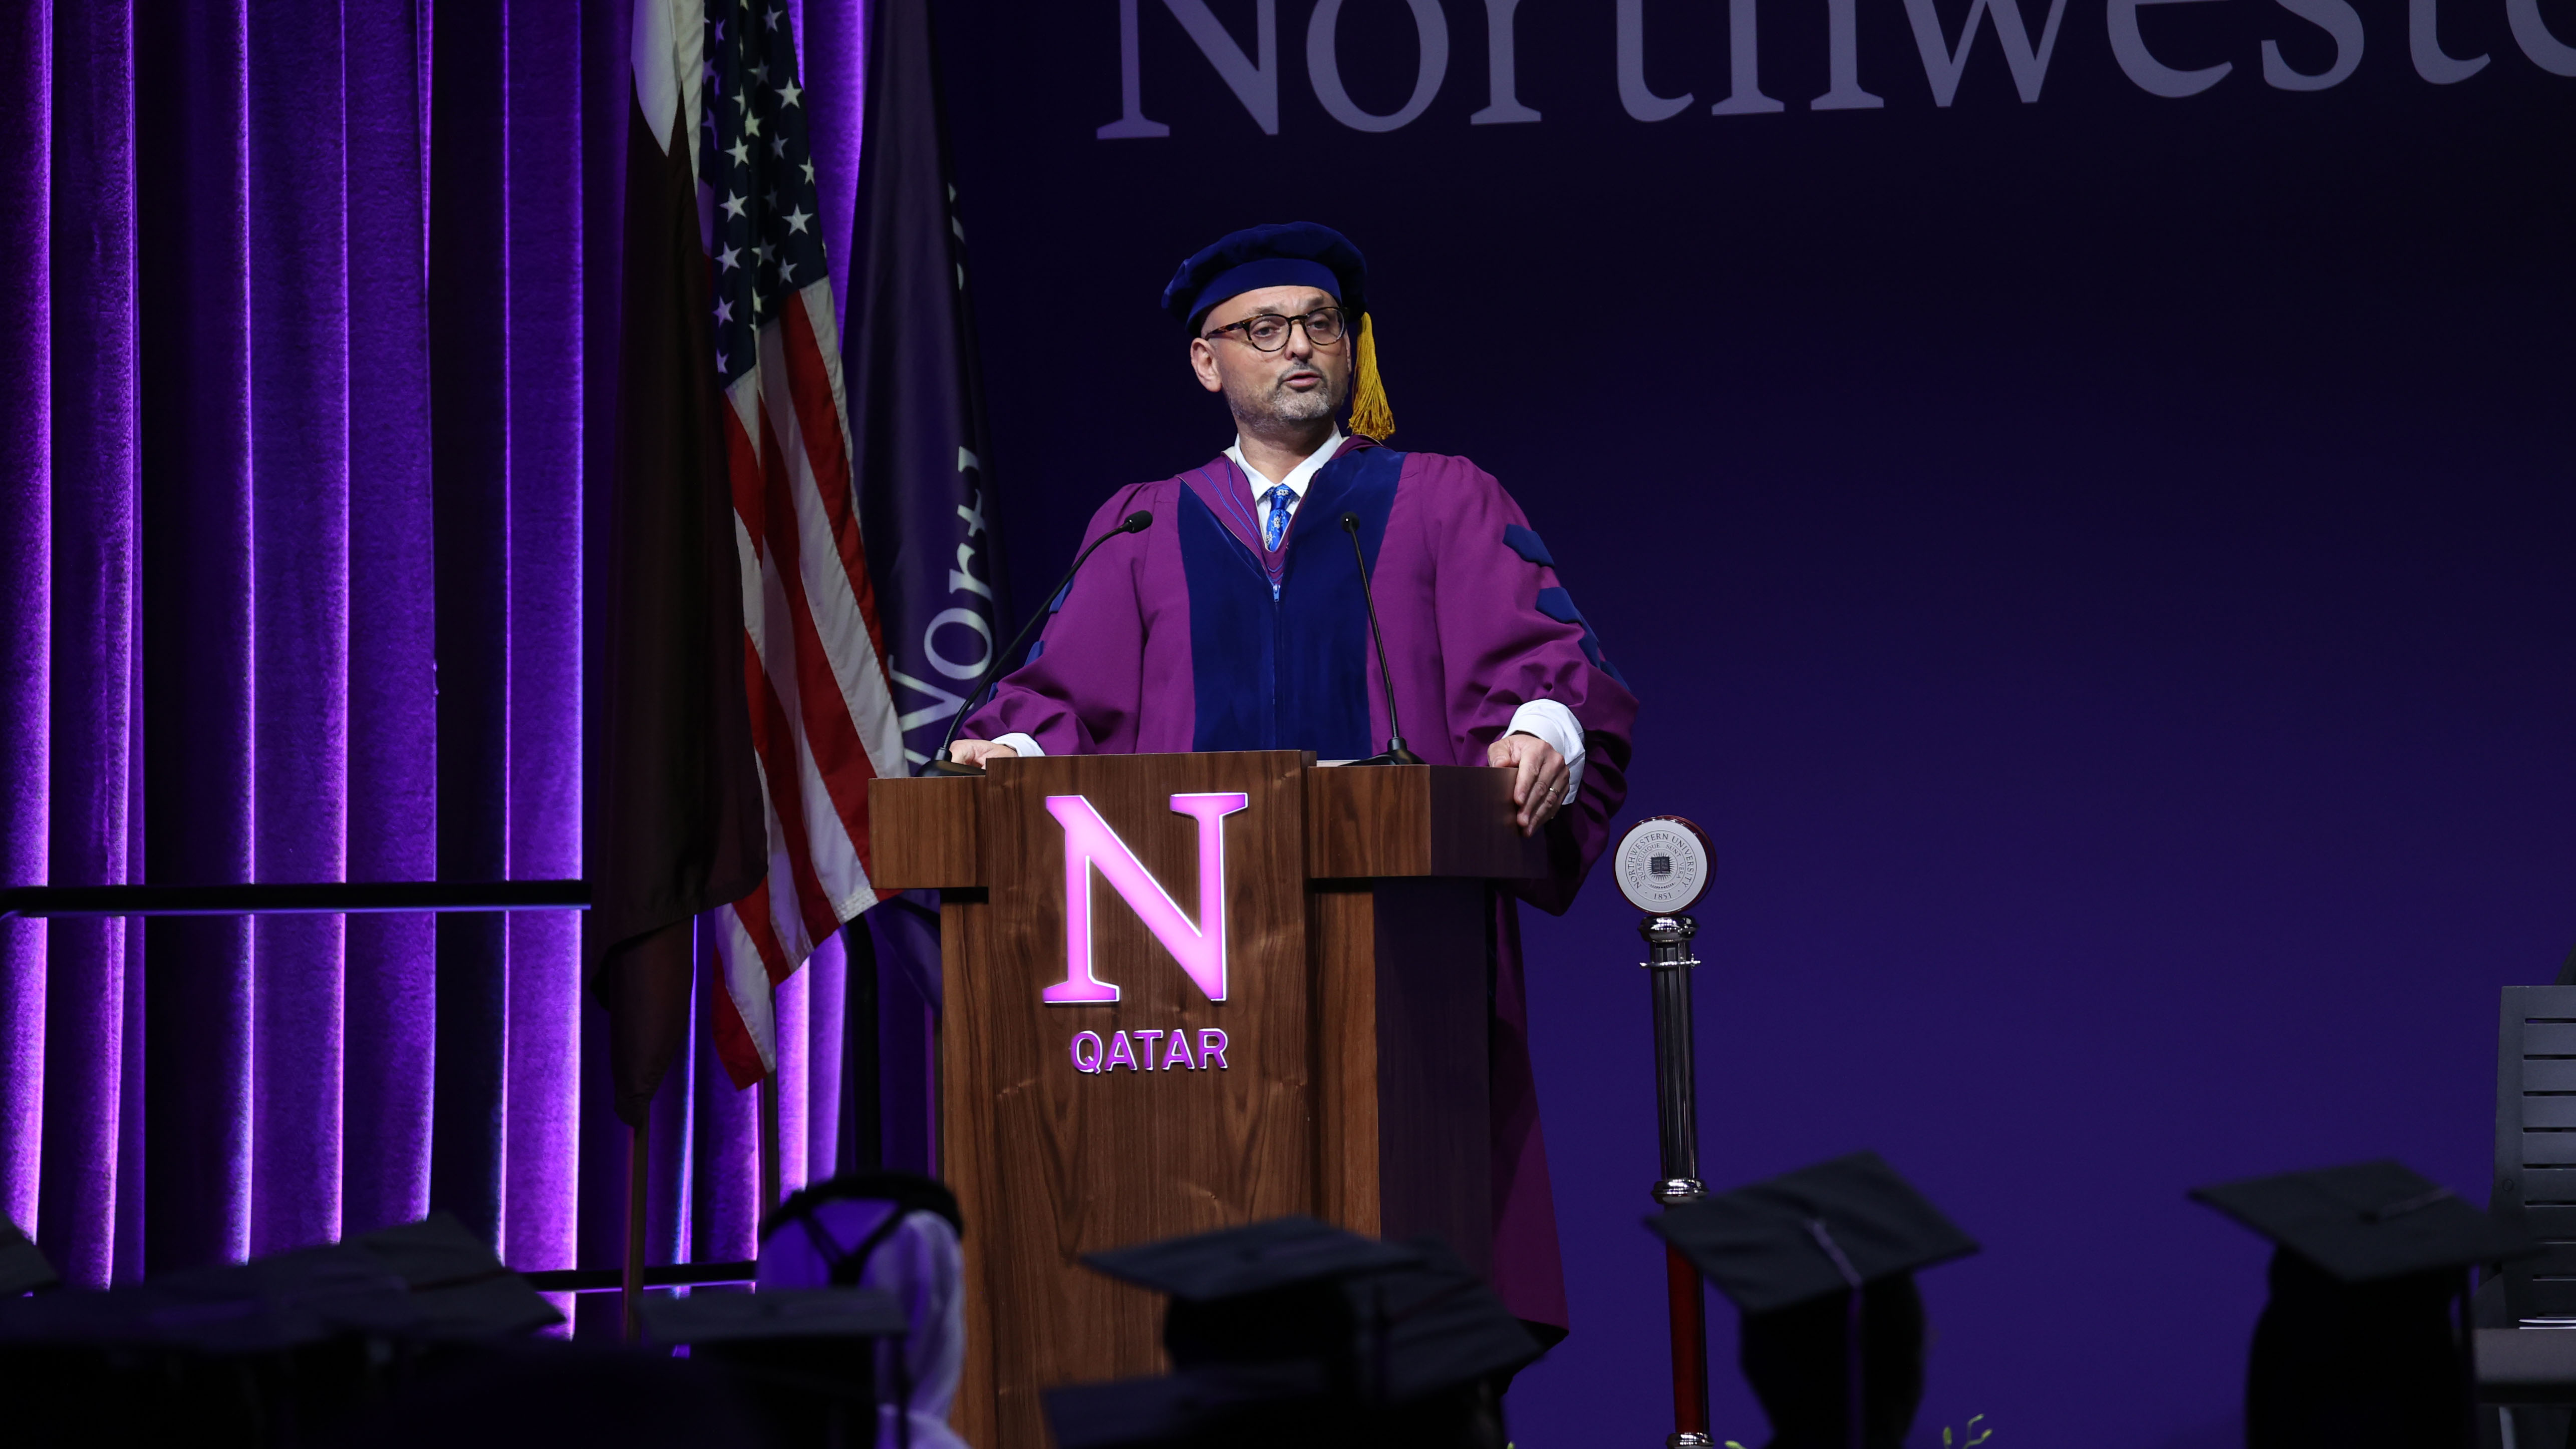 Kraidy urged the Class of 2023 to center excellence in their journeys after graduation but to do so with humility